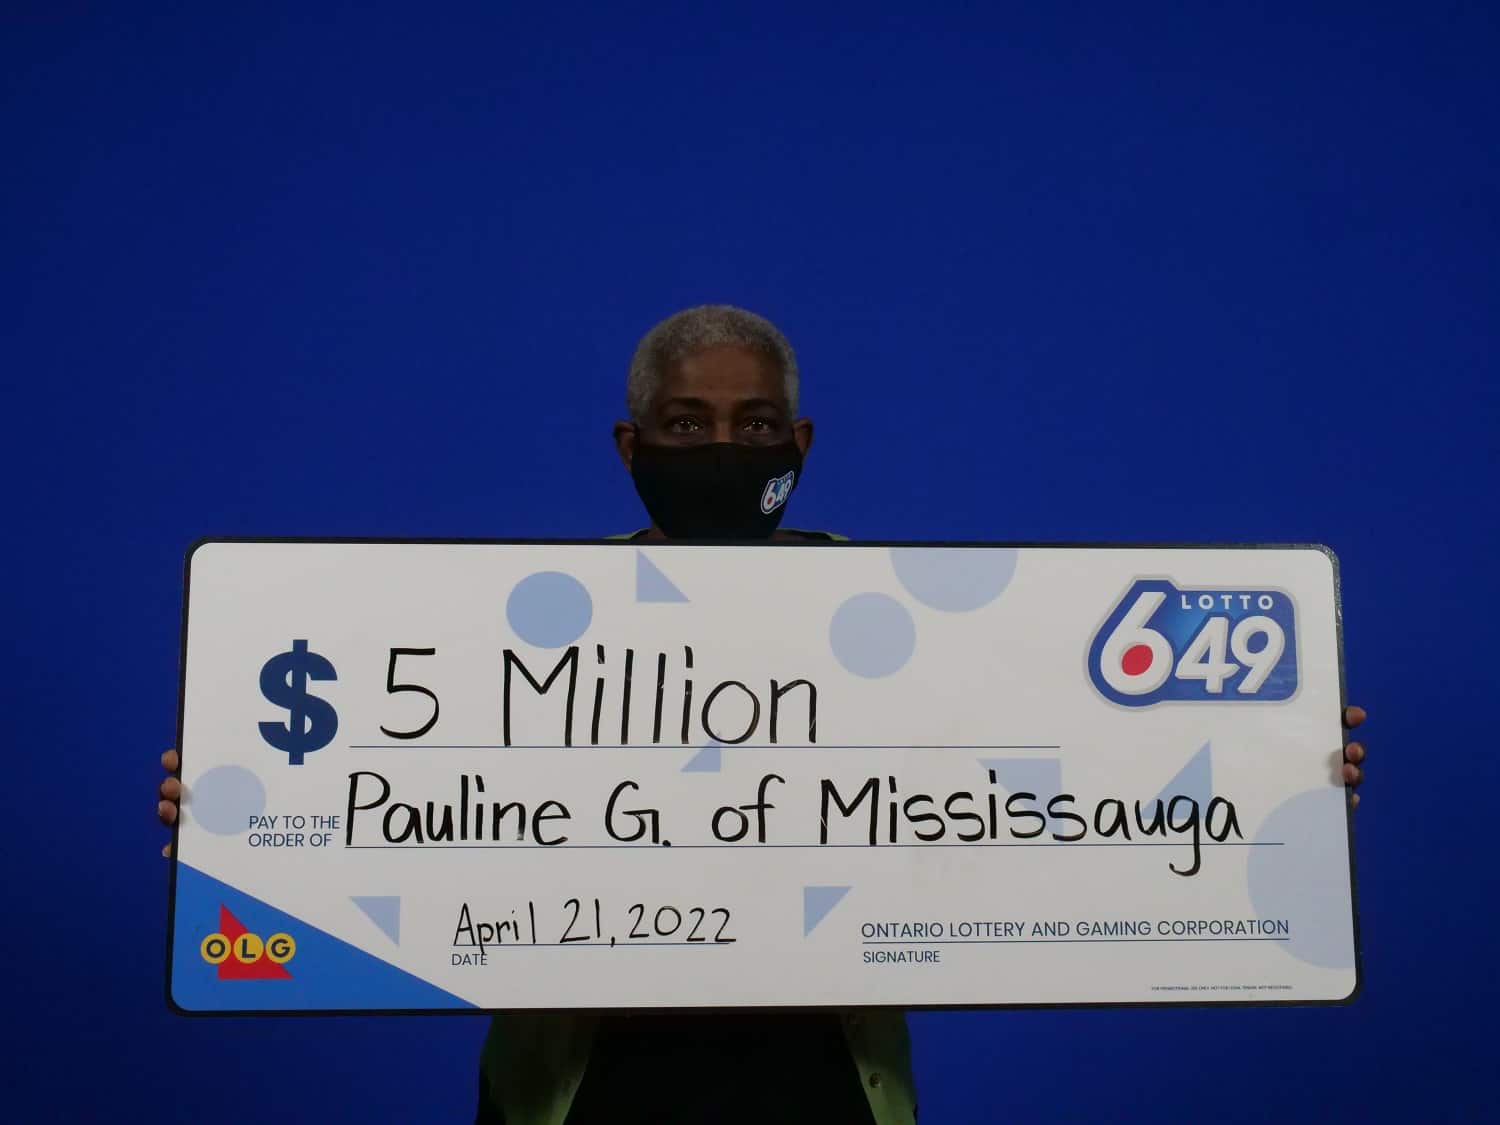 Mississauga lotto winner happy to share news of $5 million jackpot with daughter